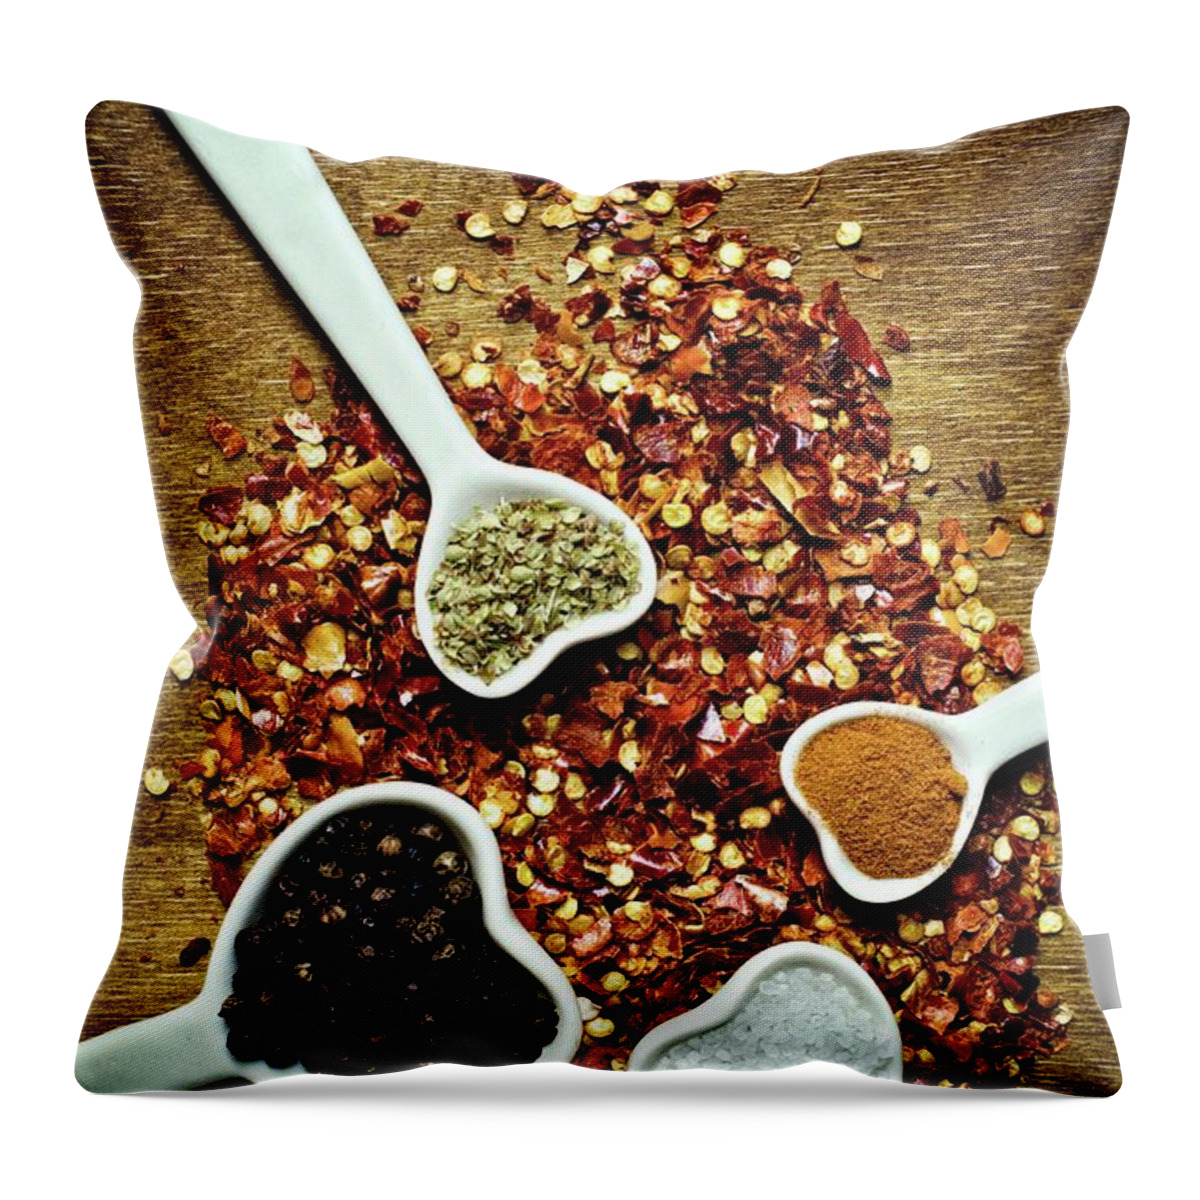 Spoon Throw Pillow featuring the photograph Spoons And Spices by Michelle Mcmahon